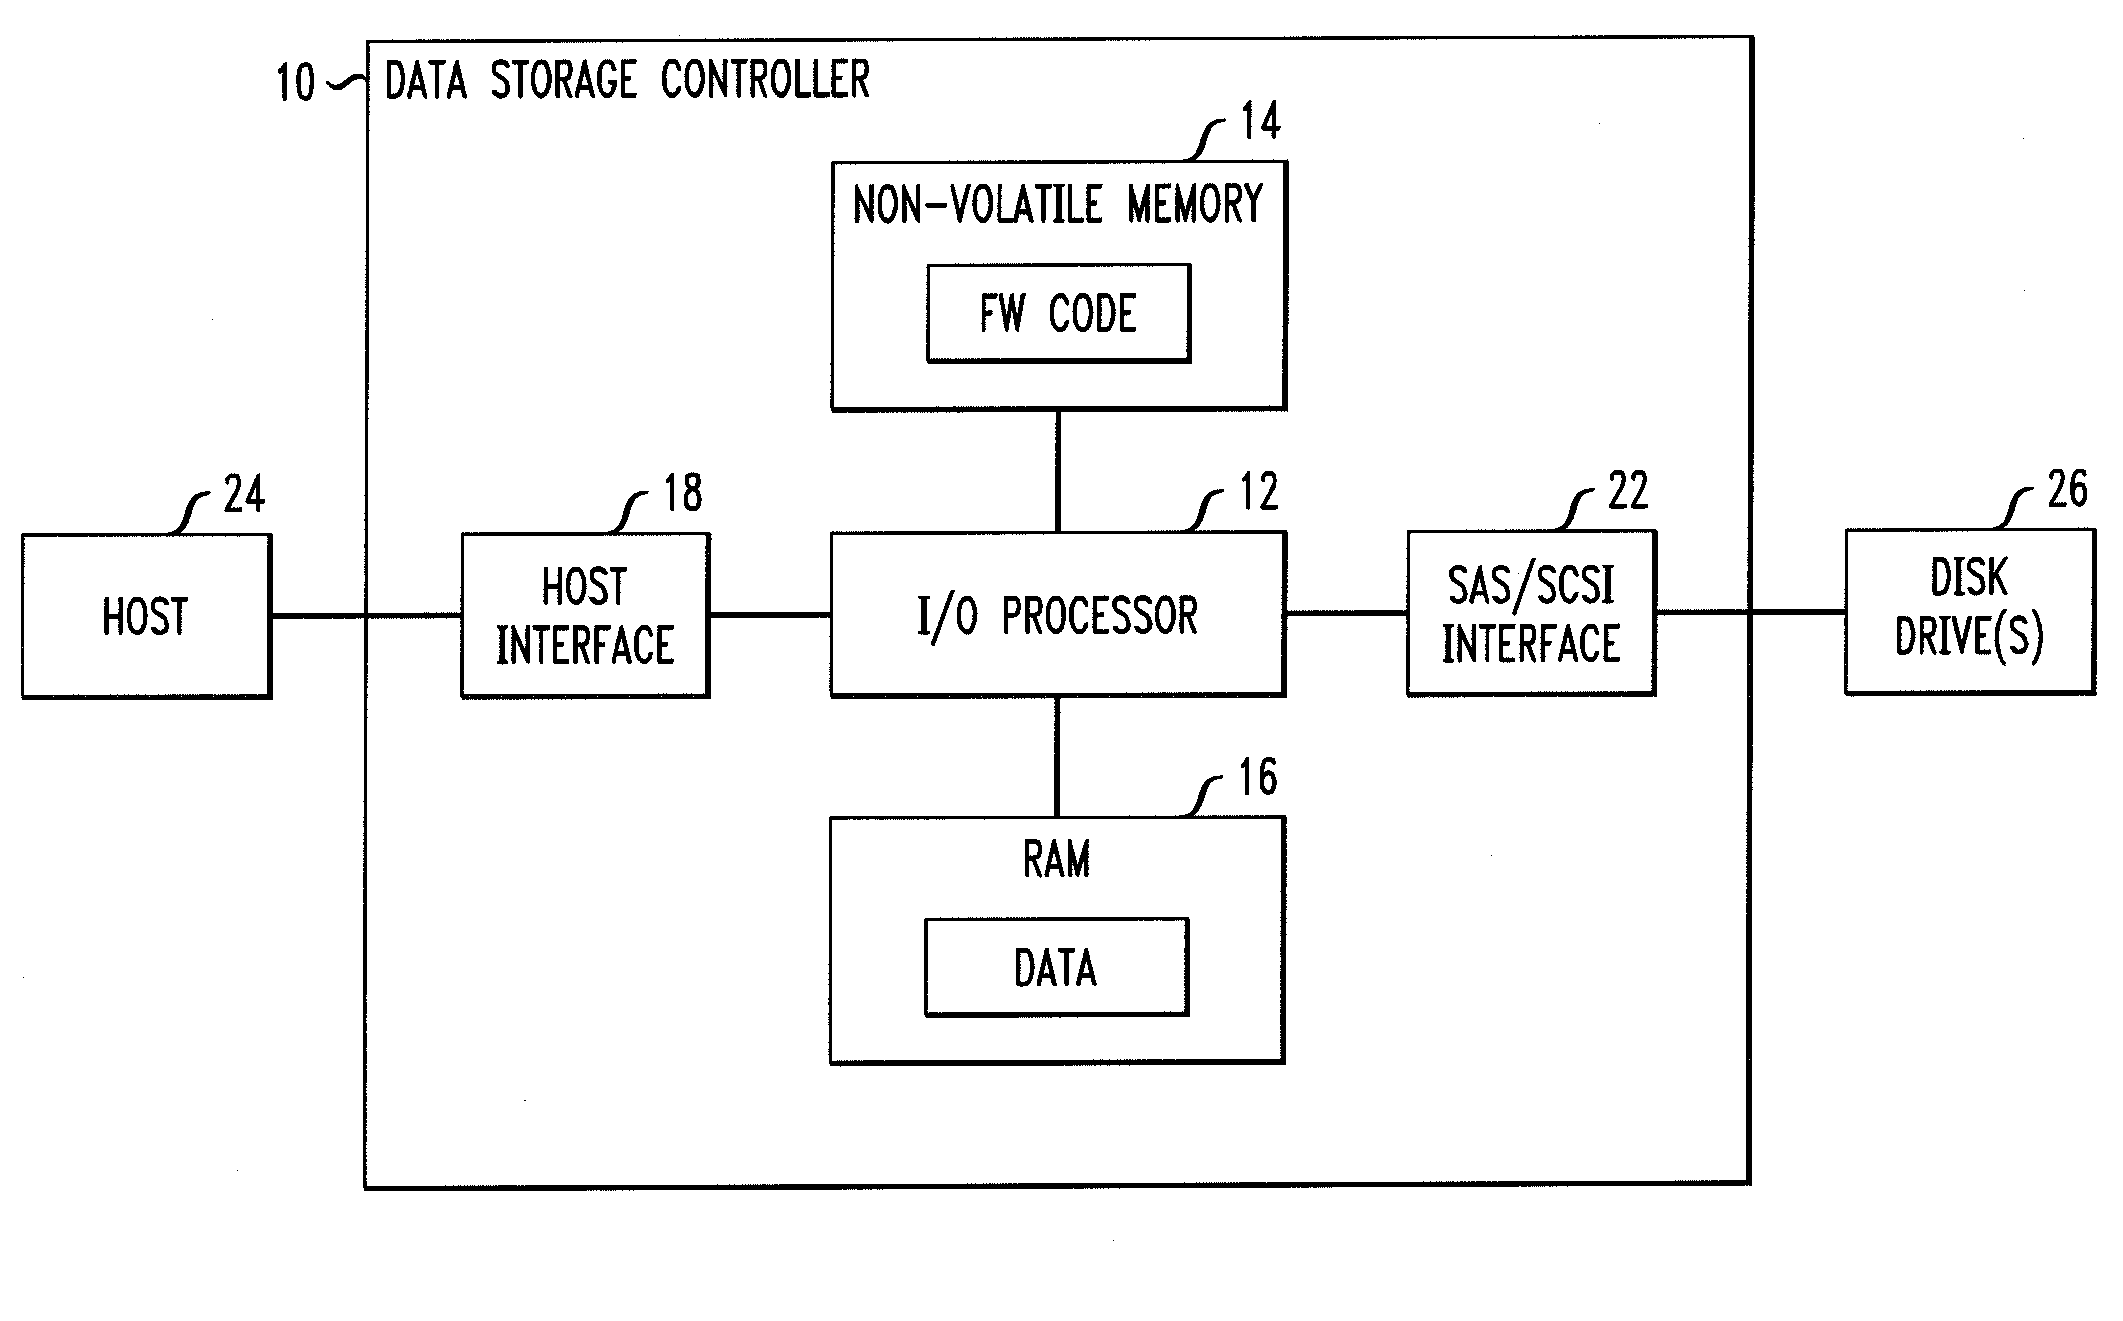 Method and system for modifying firmware image settings within data storgae device controllers